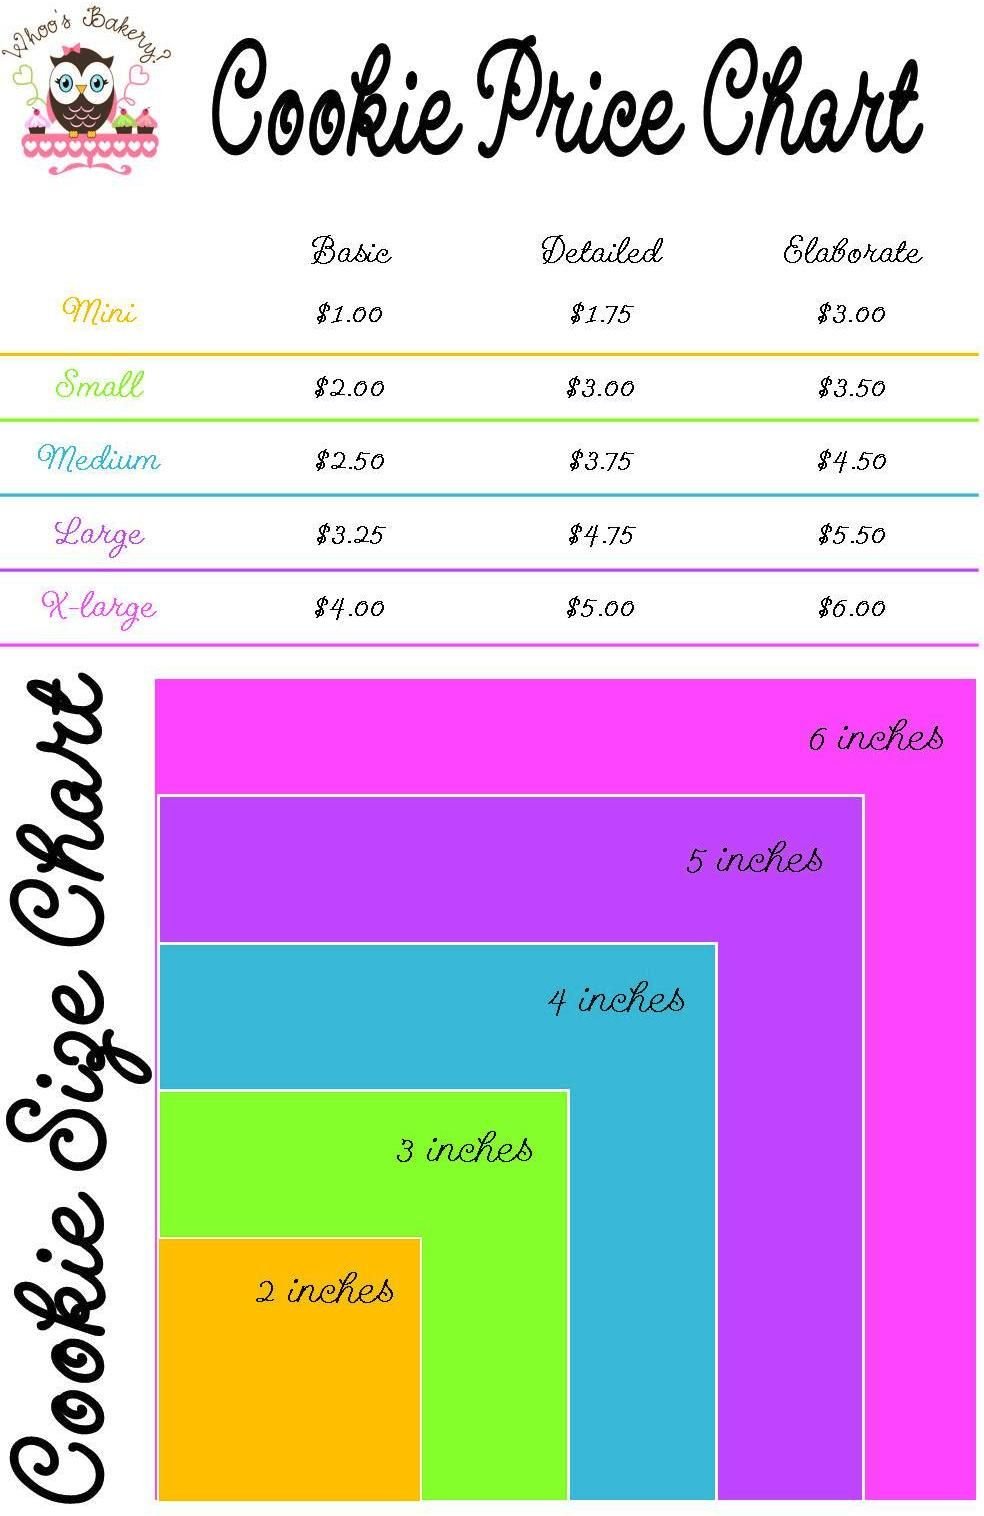 Another Version Of A Cookie Pricing Chart